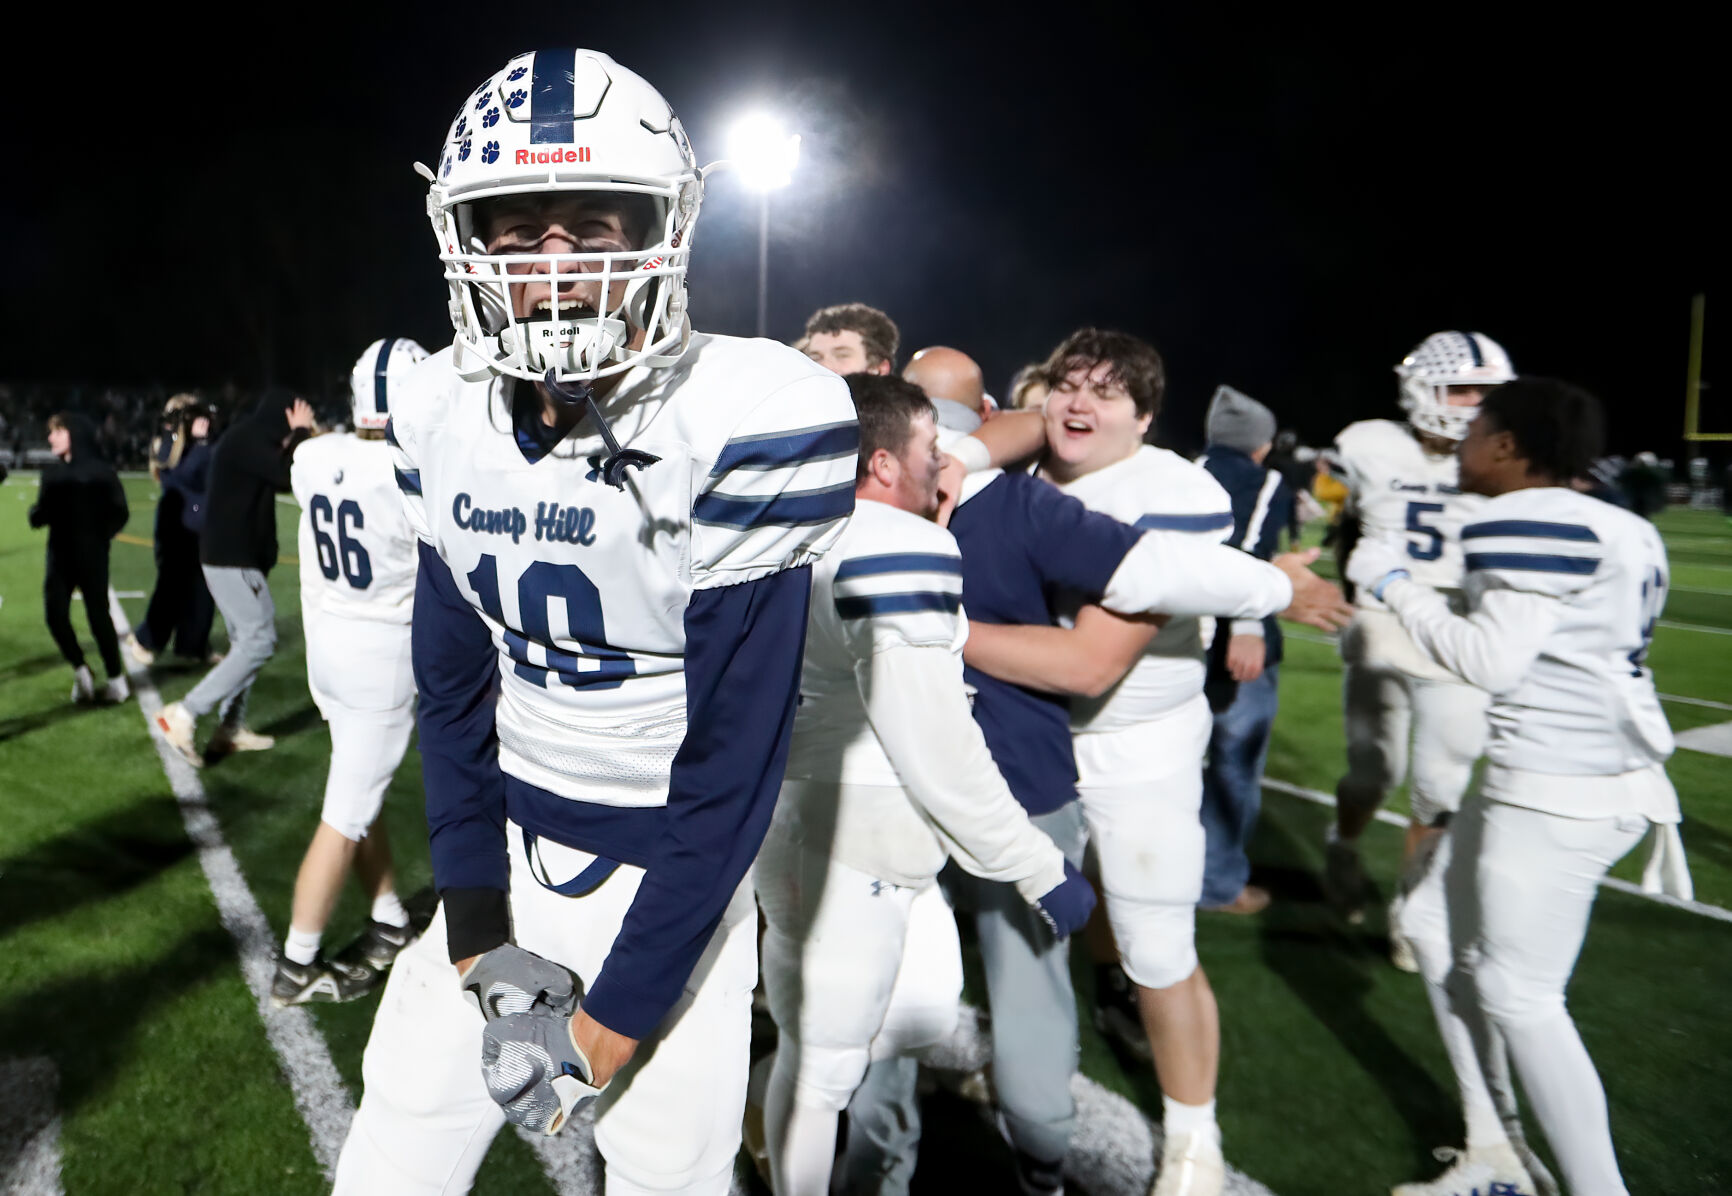 Dunmore Dominates Camp Hill in PIAA Class 2A Quarterfinal with 41-25 Win